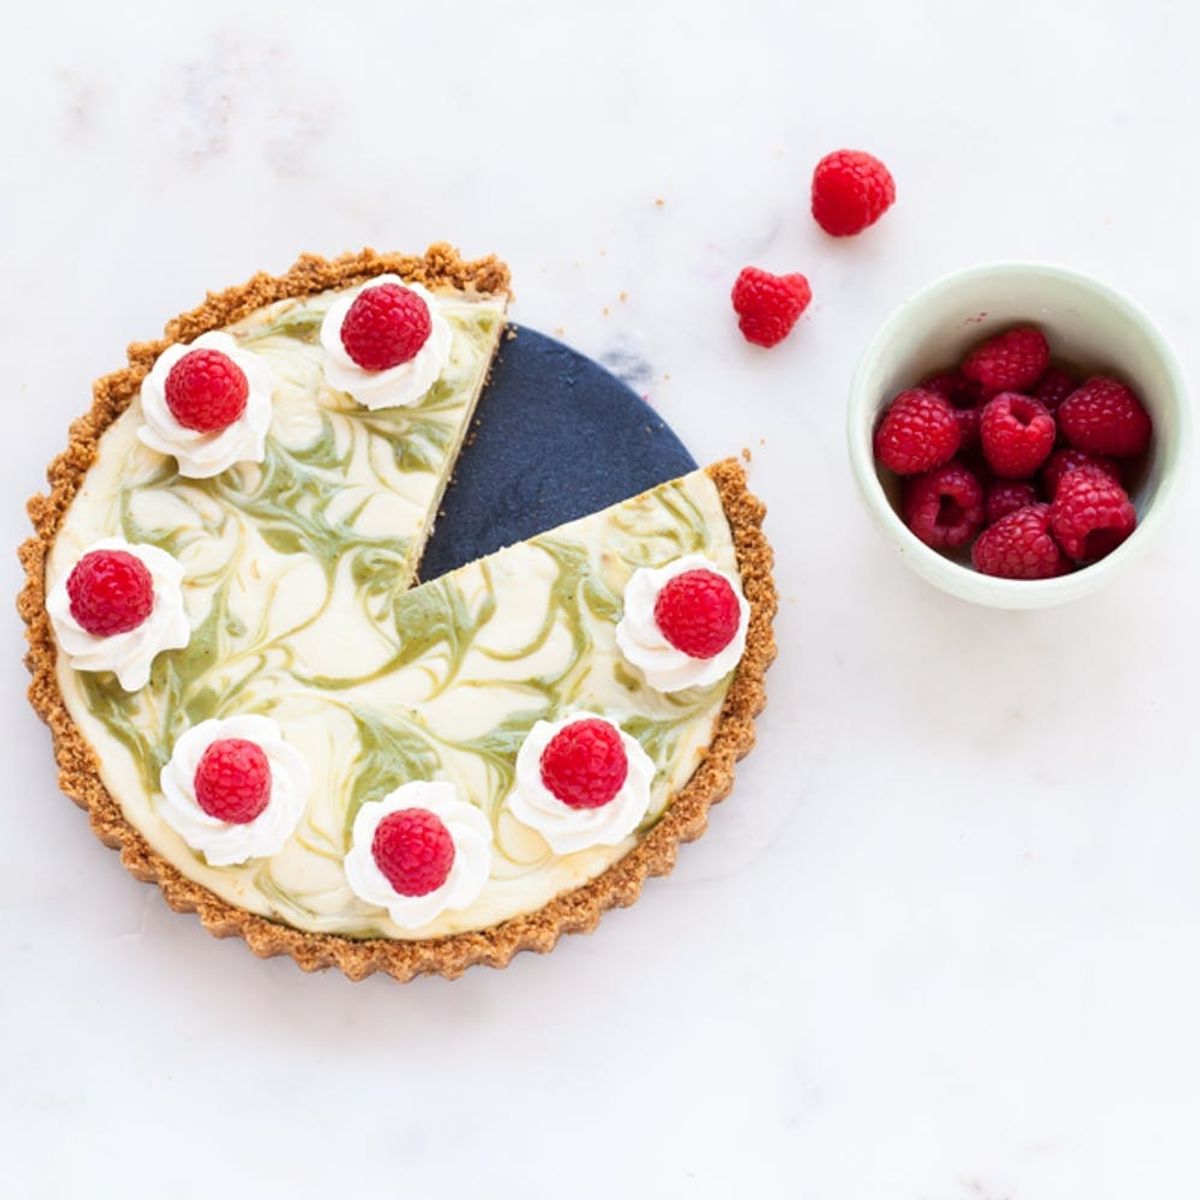 This Marbled Matcha Cheesecake Is About to Be Your New Fave Dessert